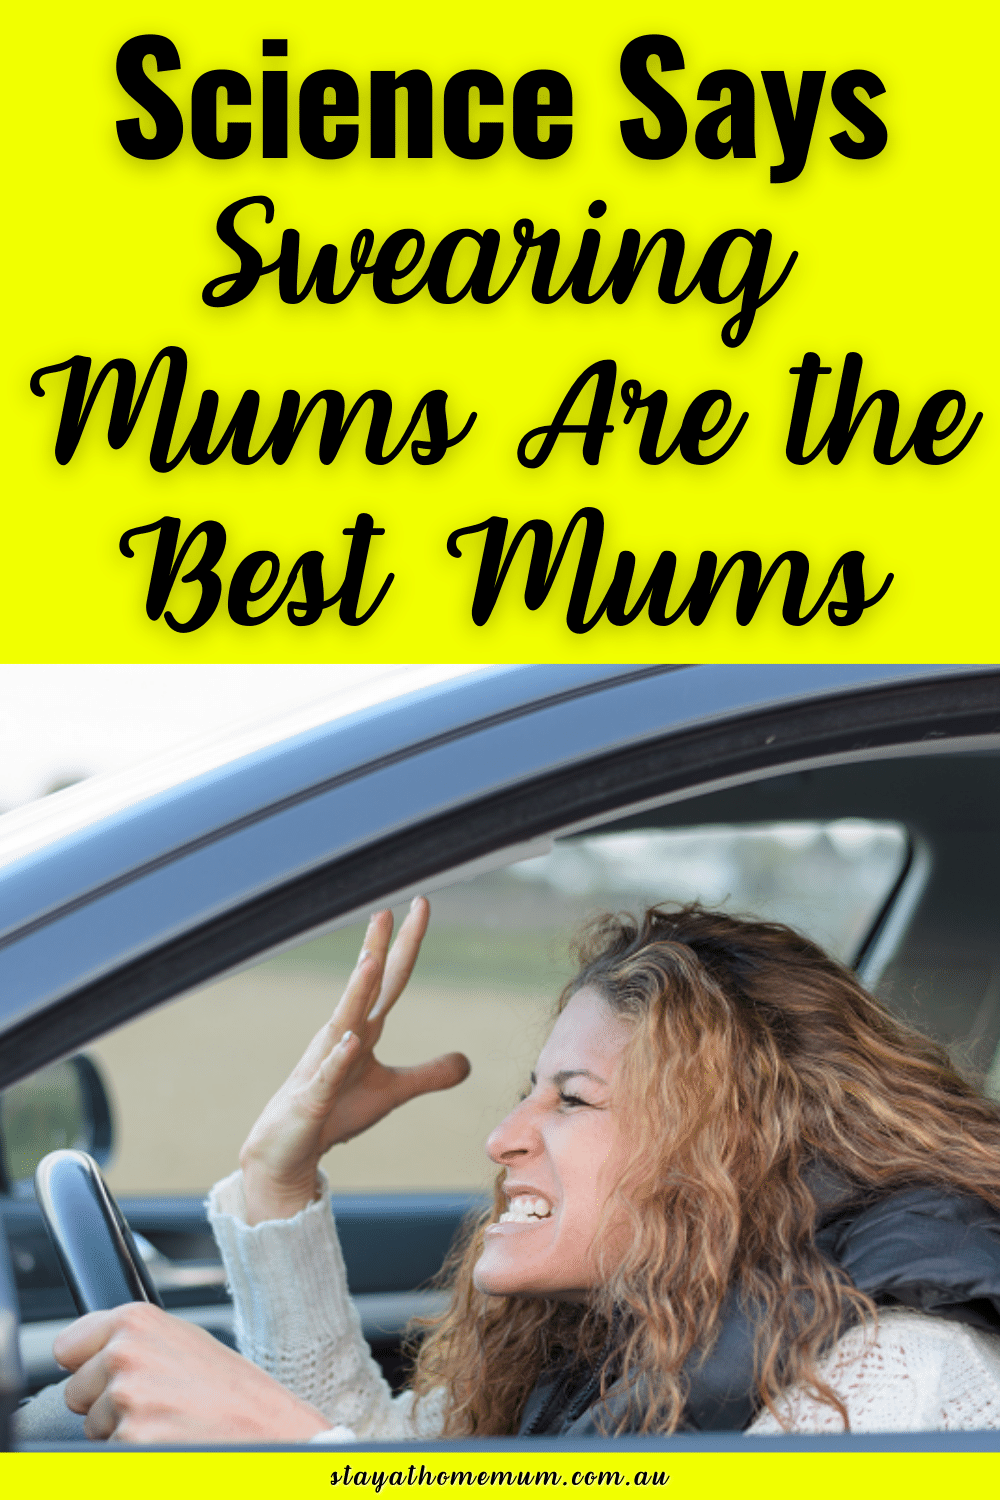 Science Says Swearing Mums Are the Best Mums | Stay At Home Mum